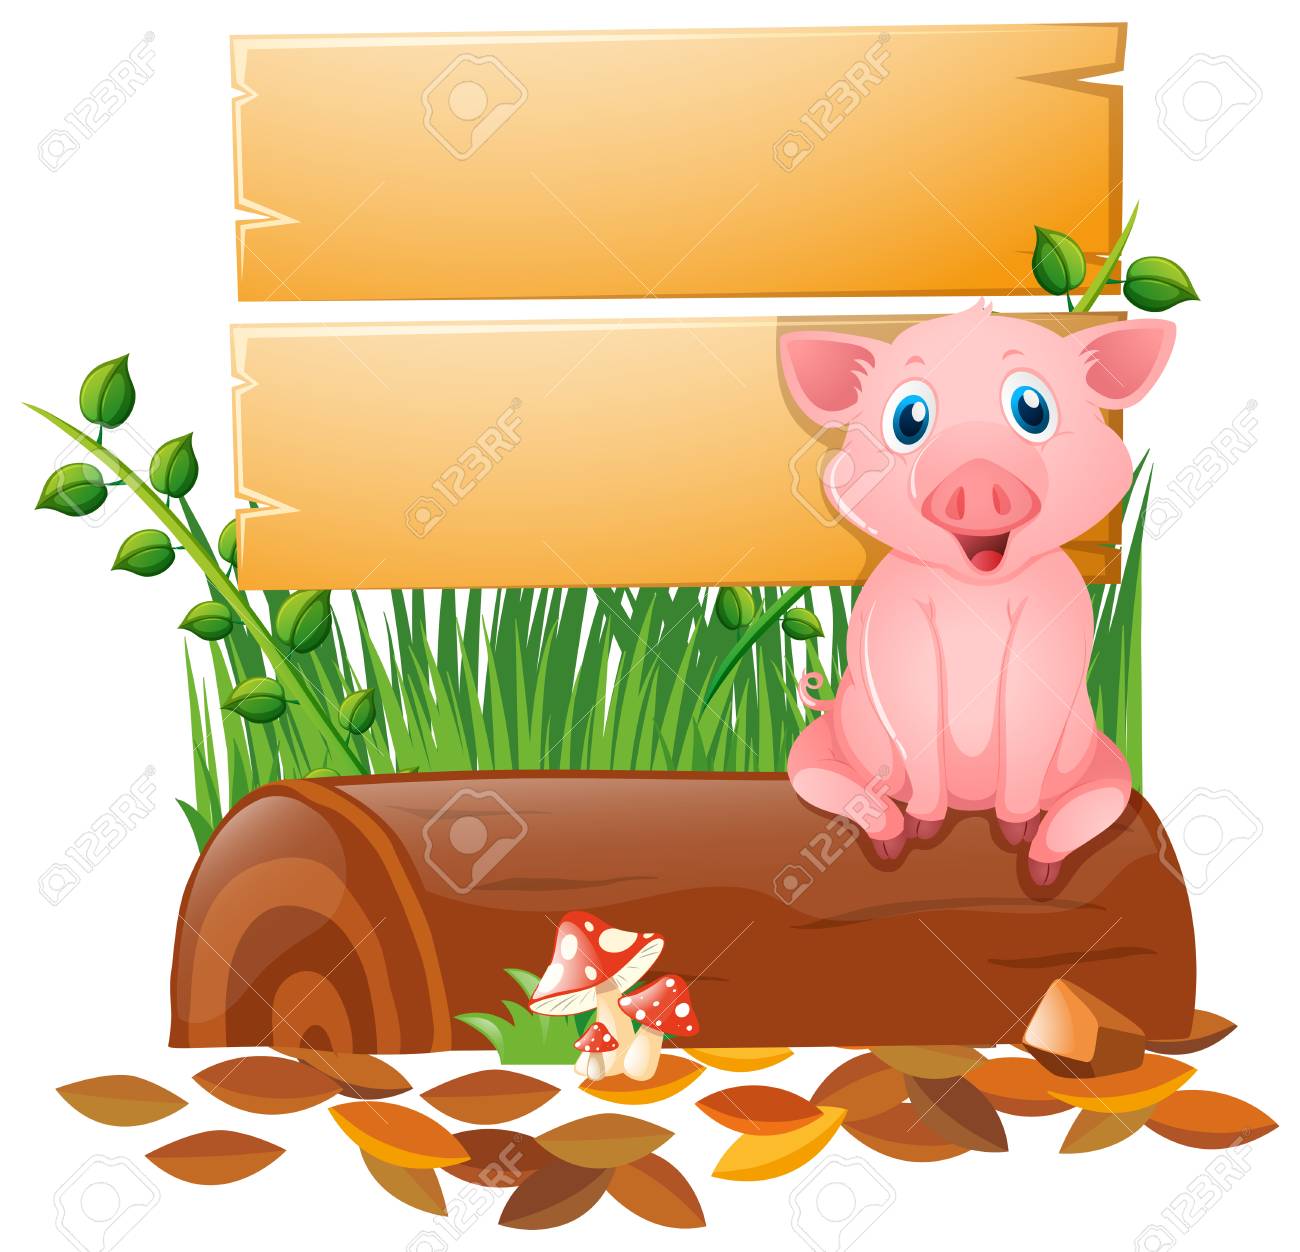 Wooden board with pig on the log illustration.